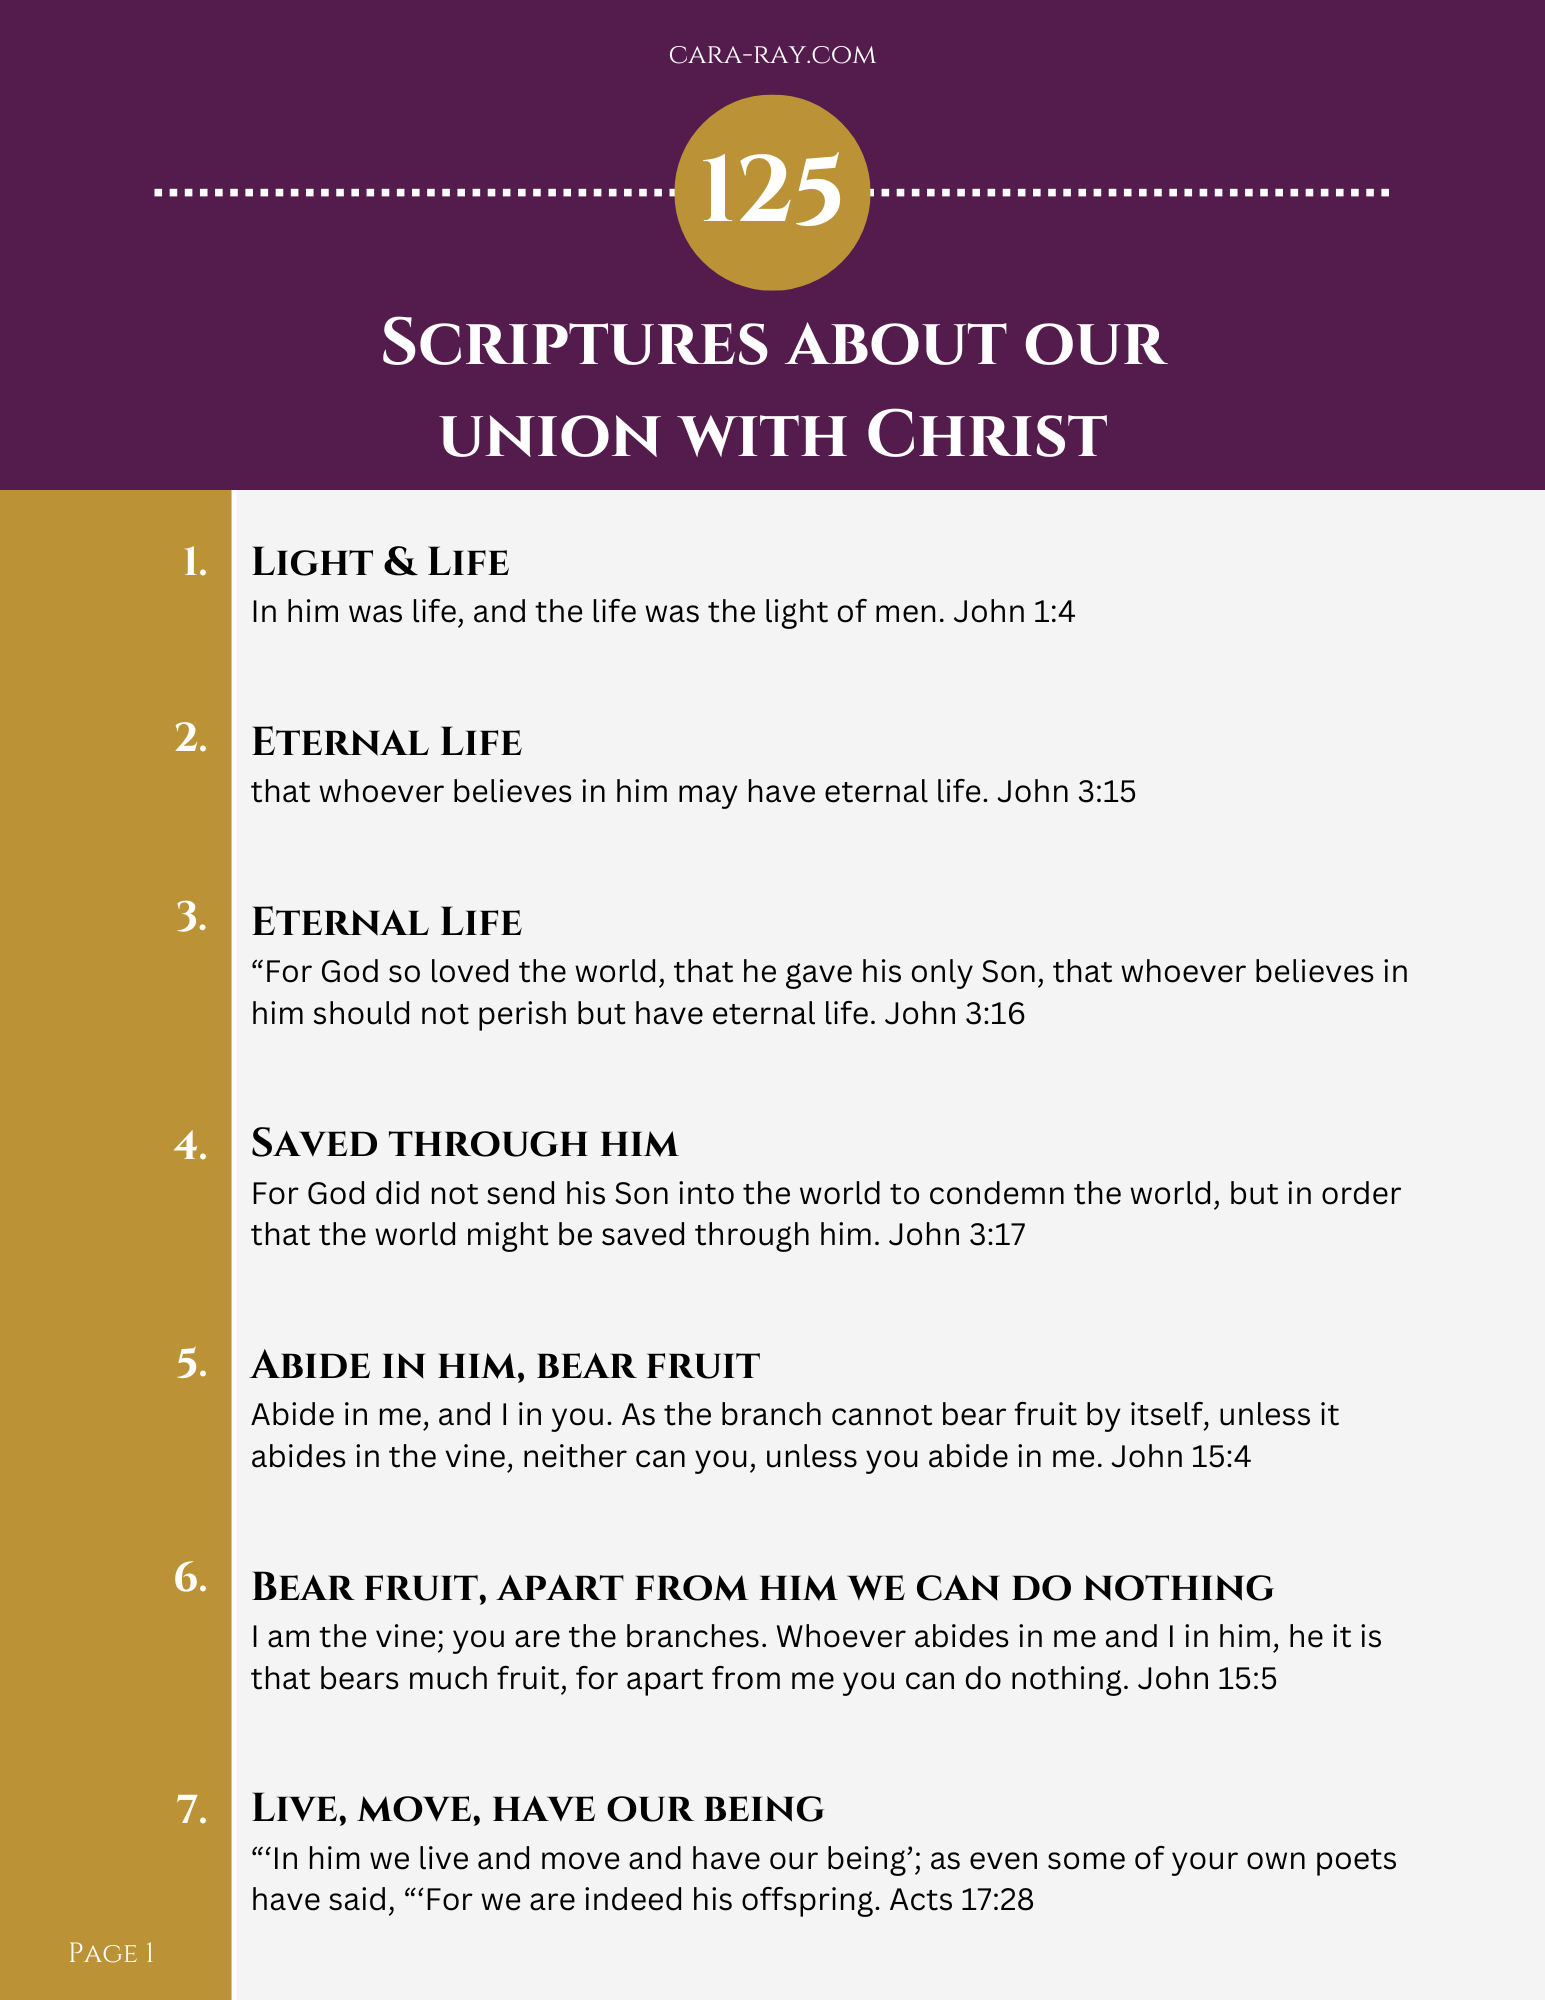 Union with Christ Scriptures (1)